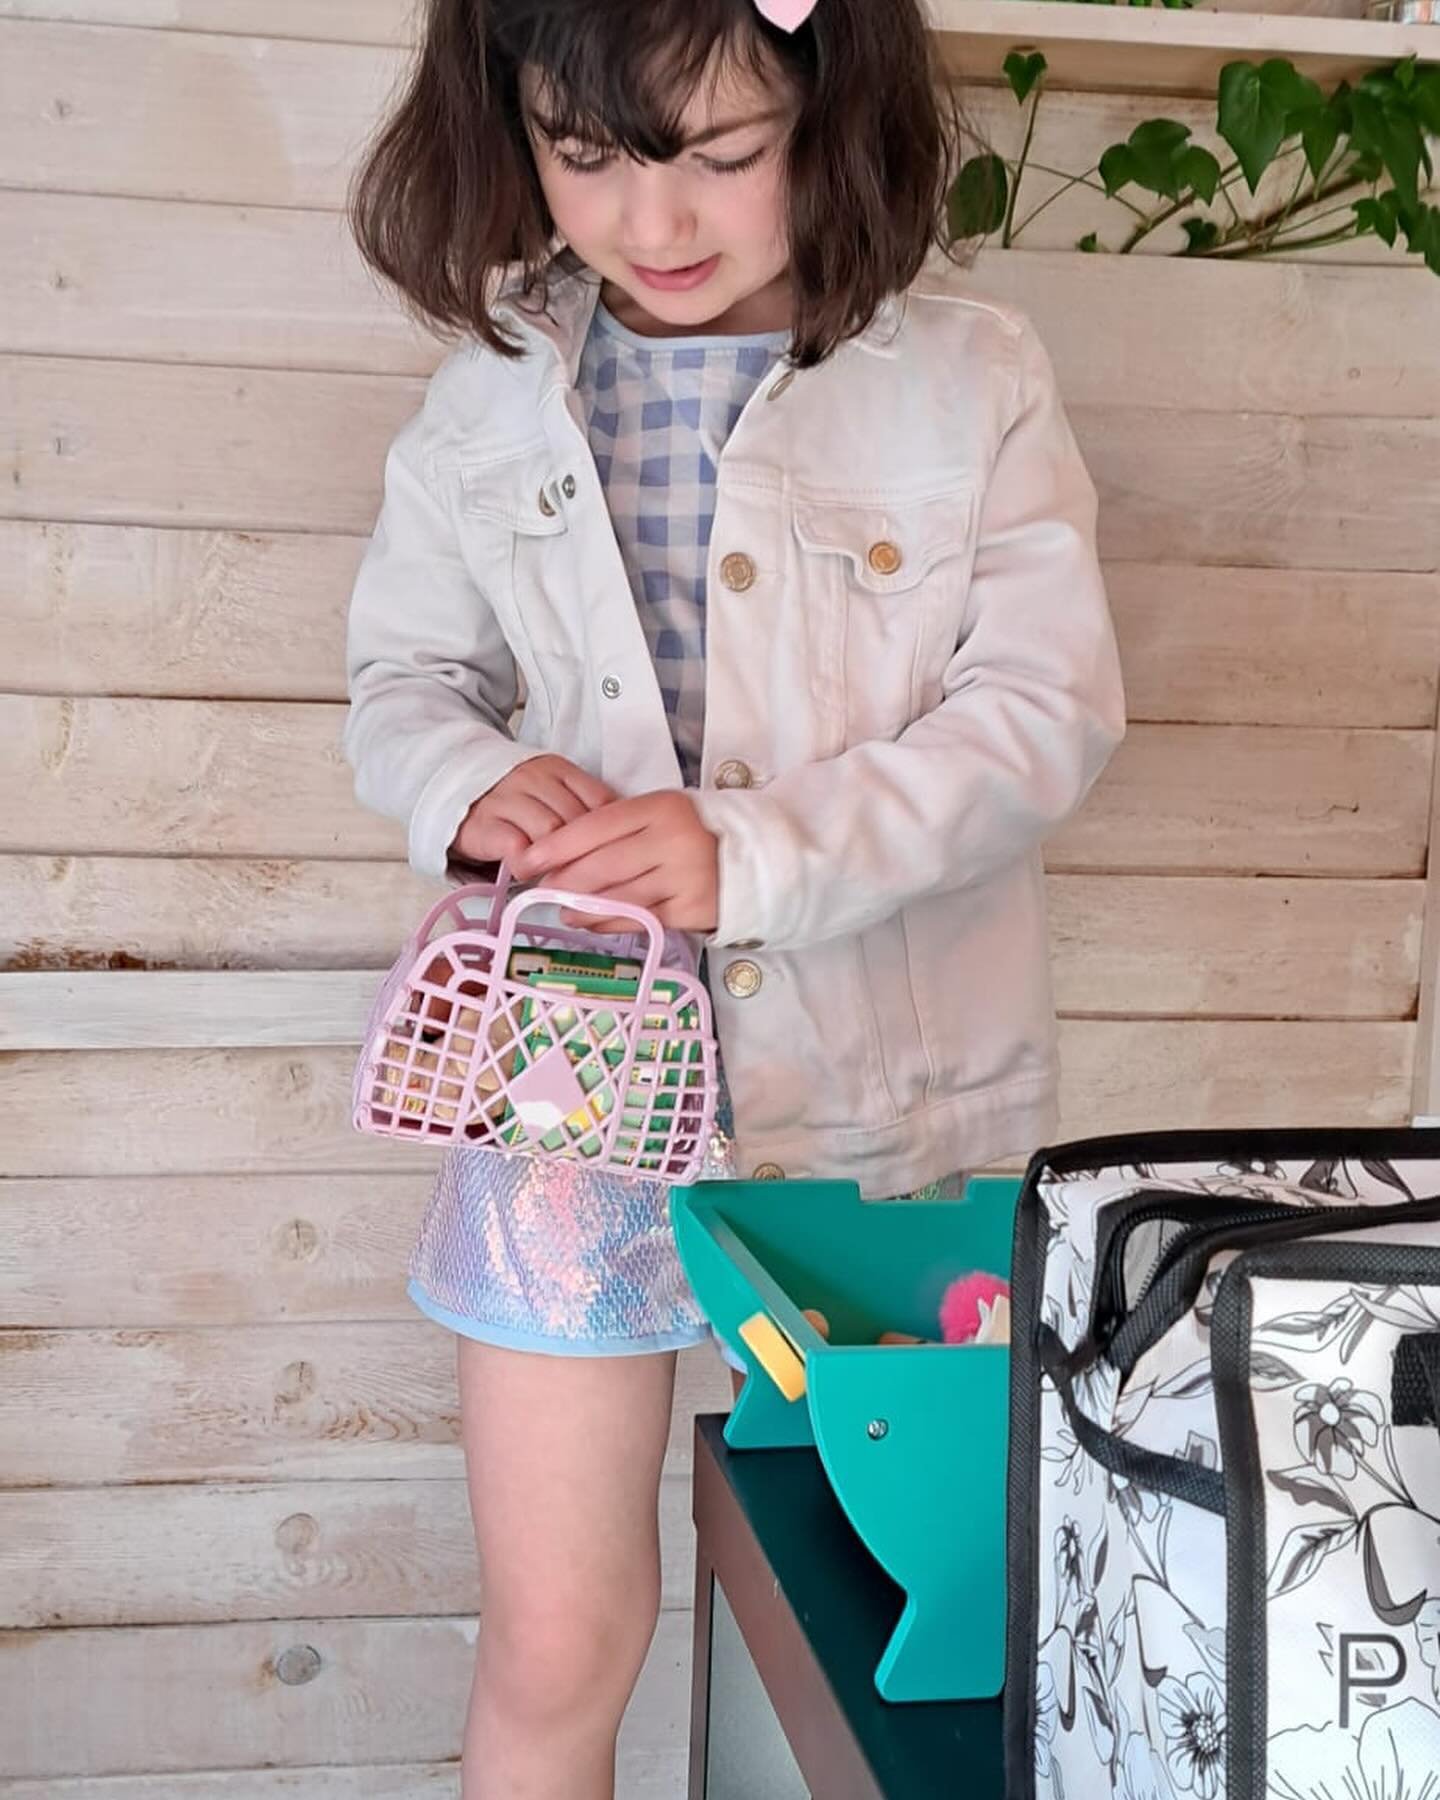 Our new @sunjellies bags are proving popular with children and adults alike. 

Bright, nostalgic and they won&rsquo;t break the bank, the perfect addition to any Summer picnic or beach outing! 

#new #newin #nostalgia #nostalgic #jellybag #sunjellies